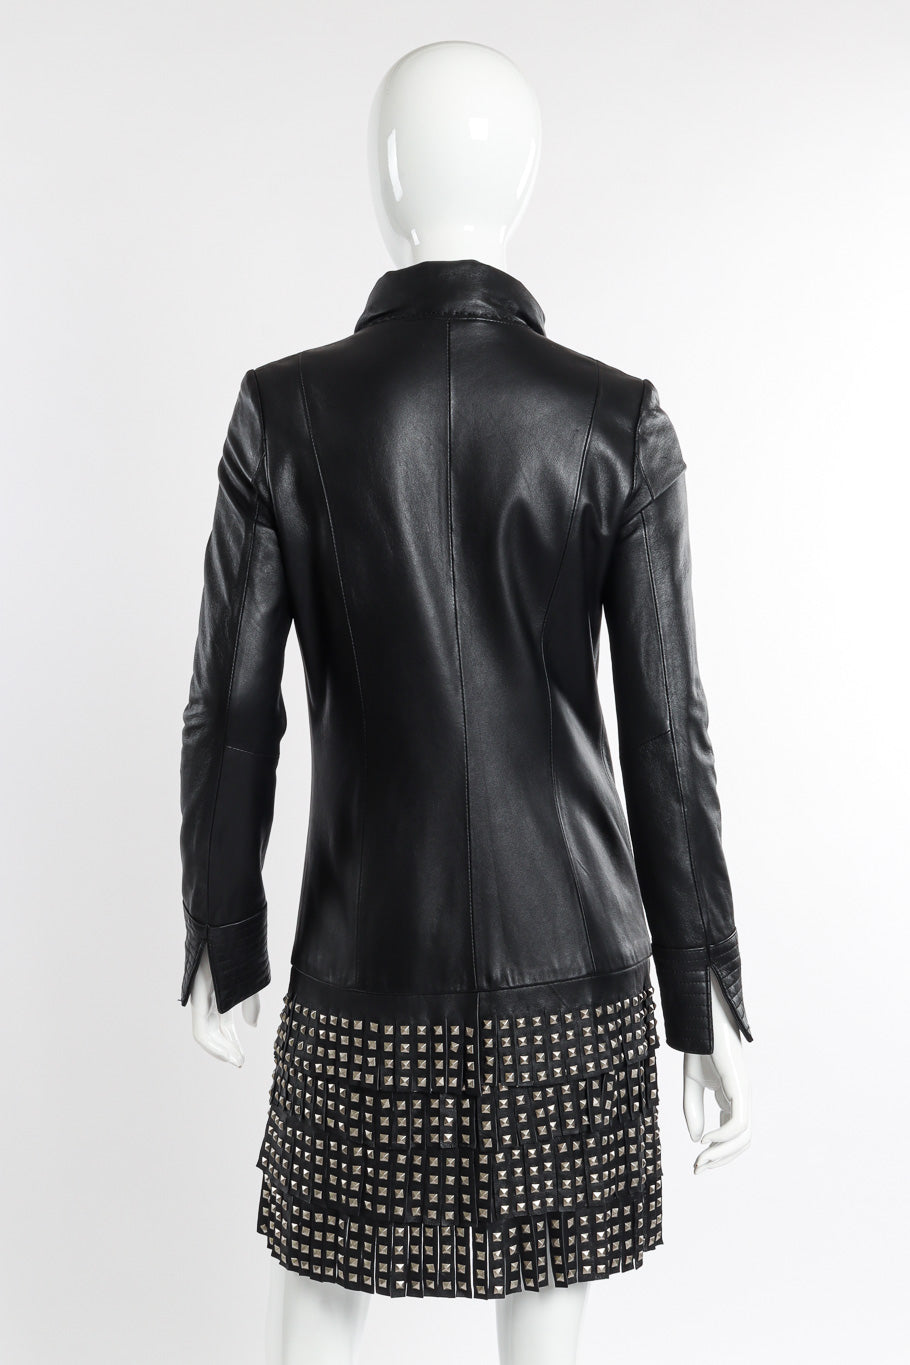 Class Roberto Cavalli Studded Leather Trench Coat back view on mannequin @recessla